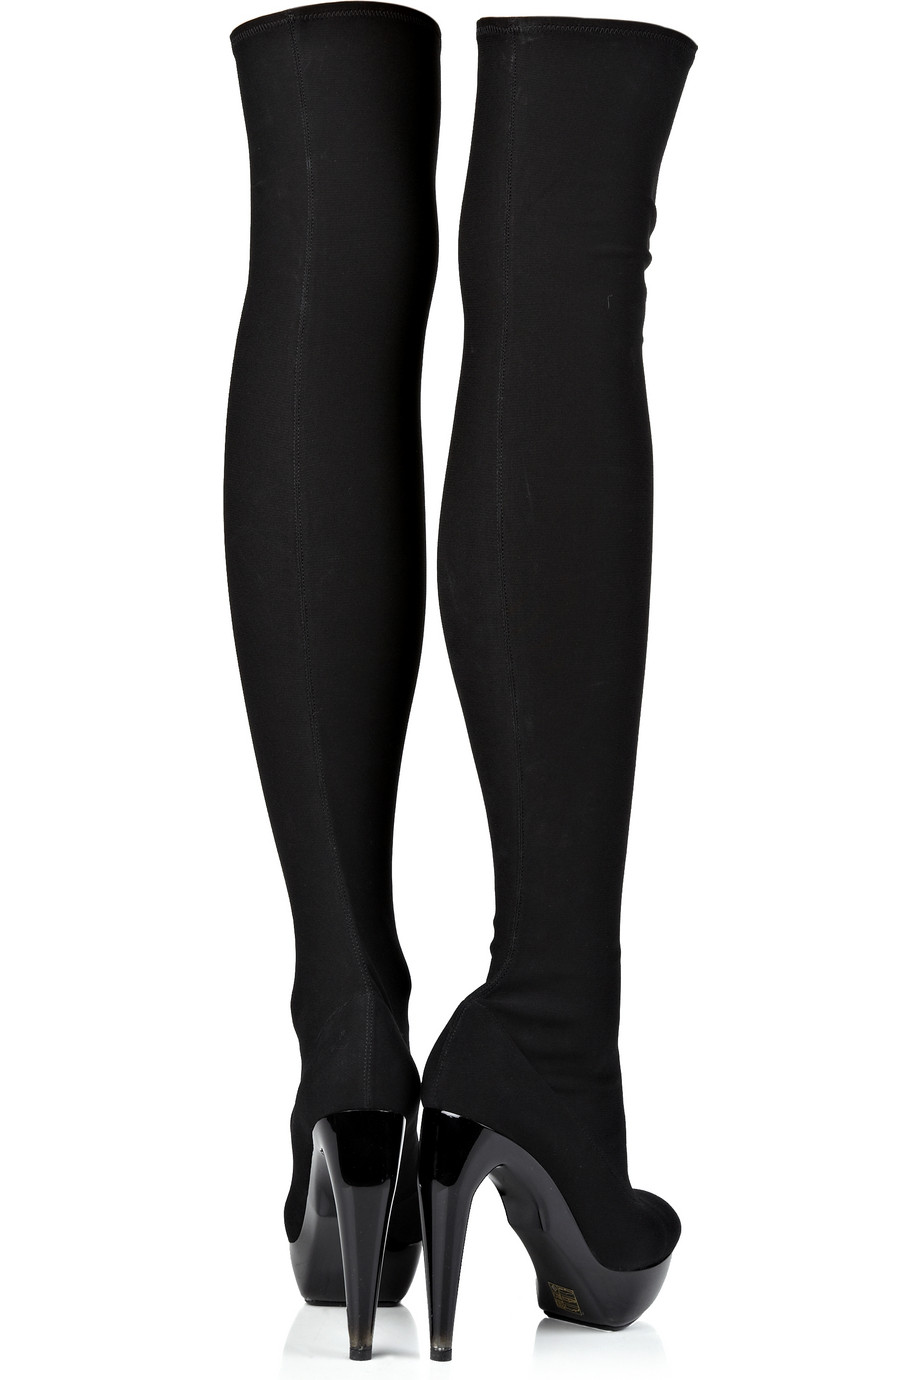 Jil sander Thigh-high Stretch-crepe Boots in Black | Lyst